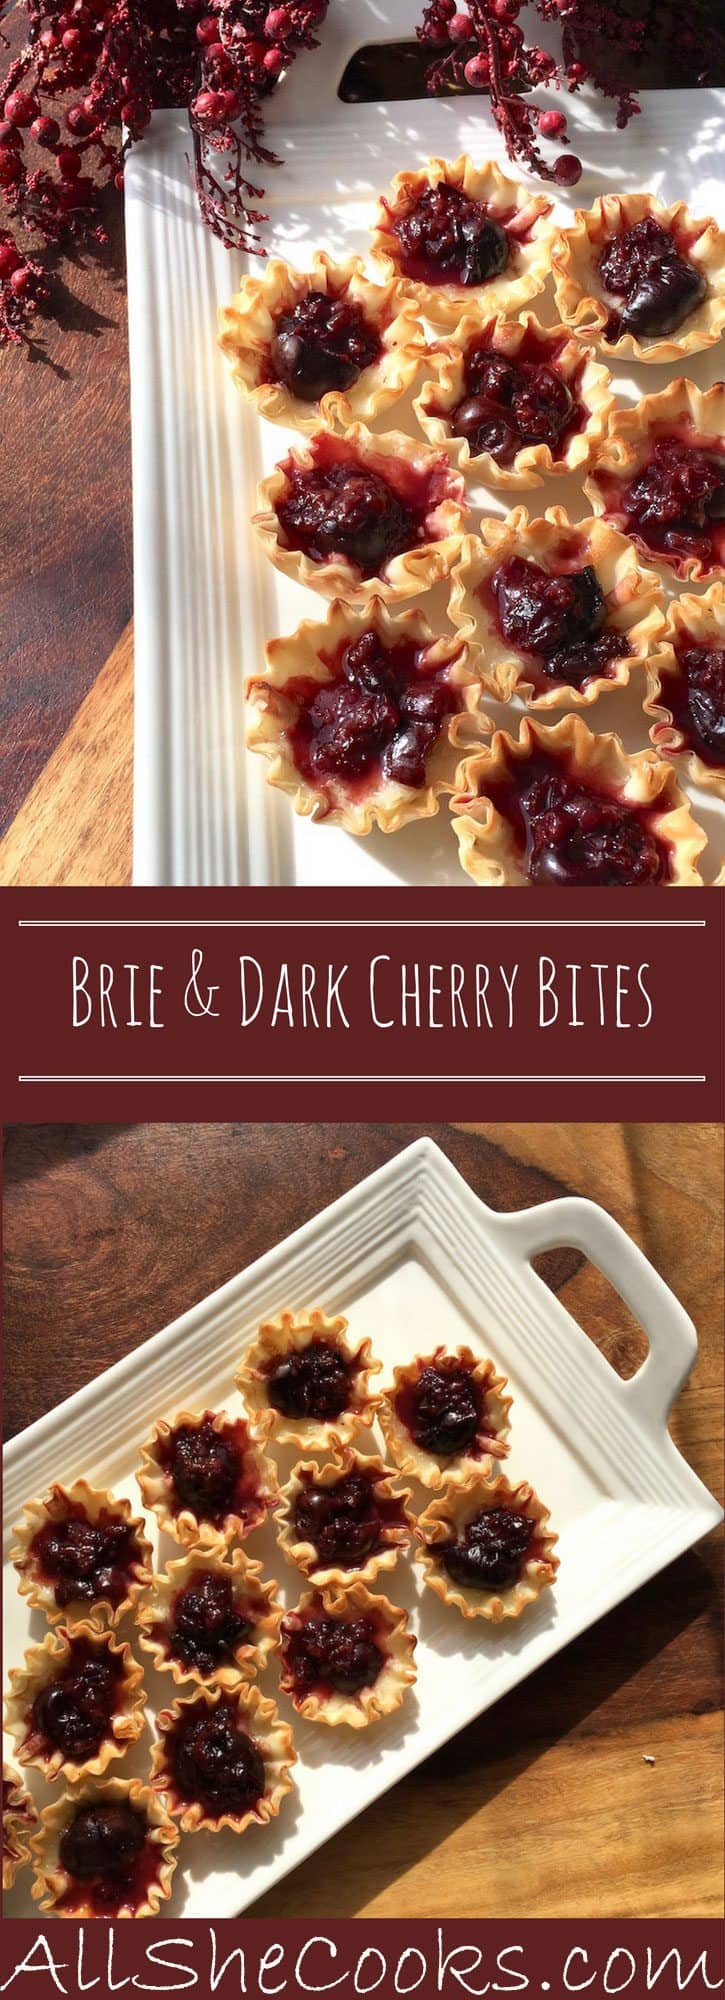 Brie & Dark Cherry Bites, a delicious appetizer phyllo appetizer recipe for a party or evening appetizers.